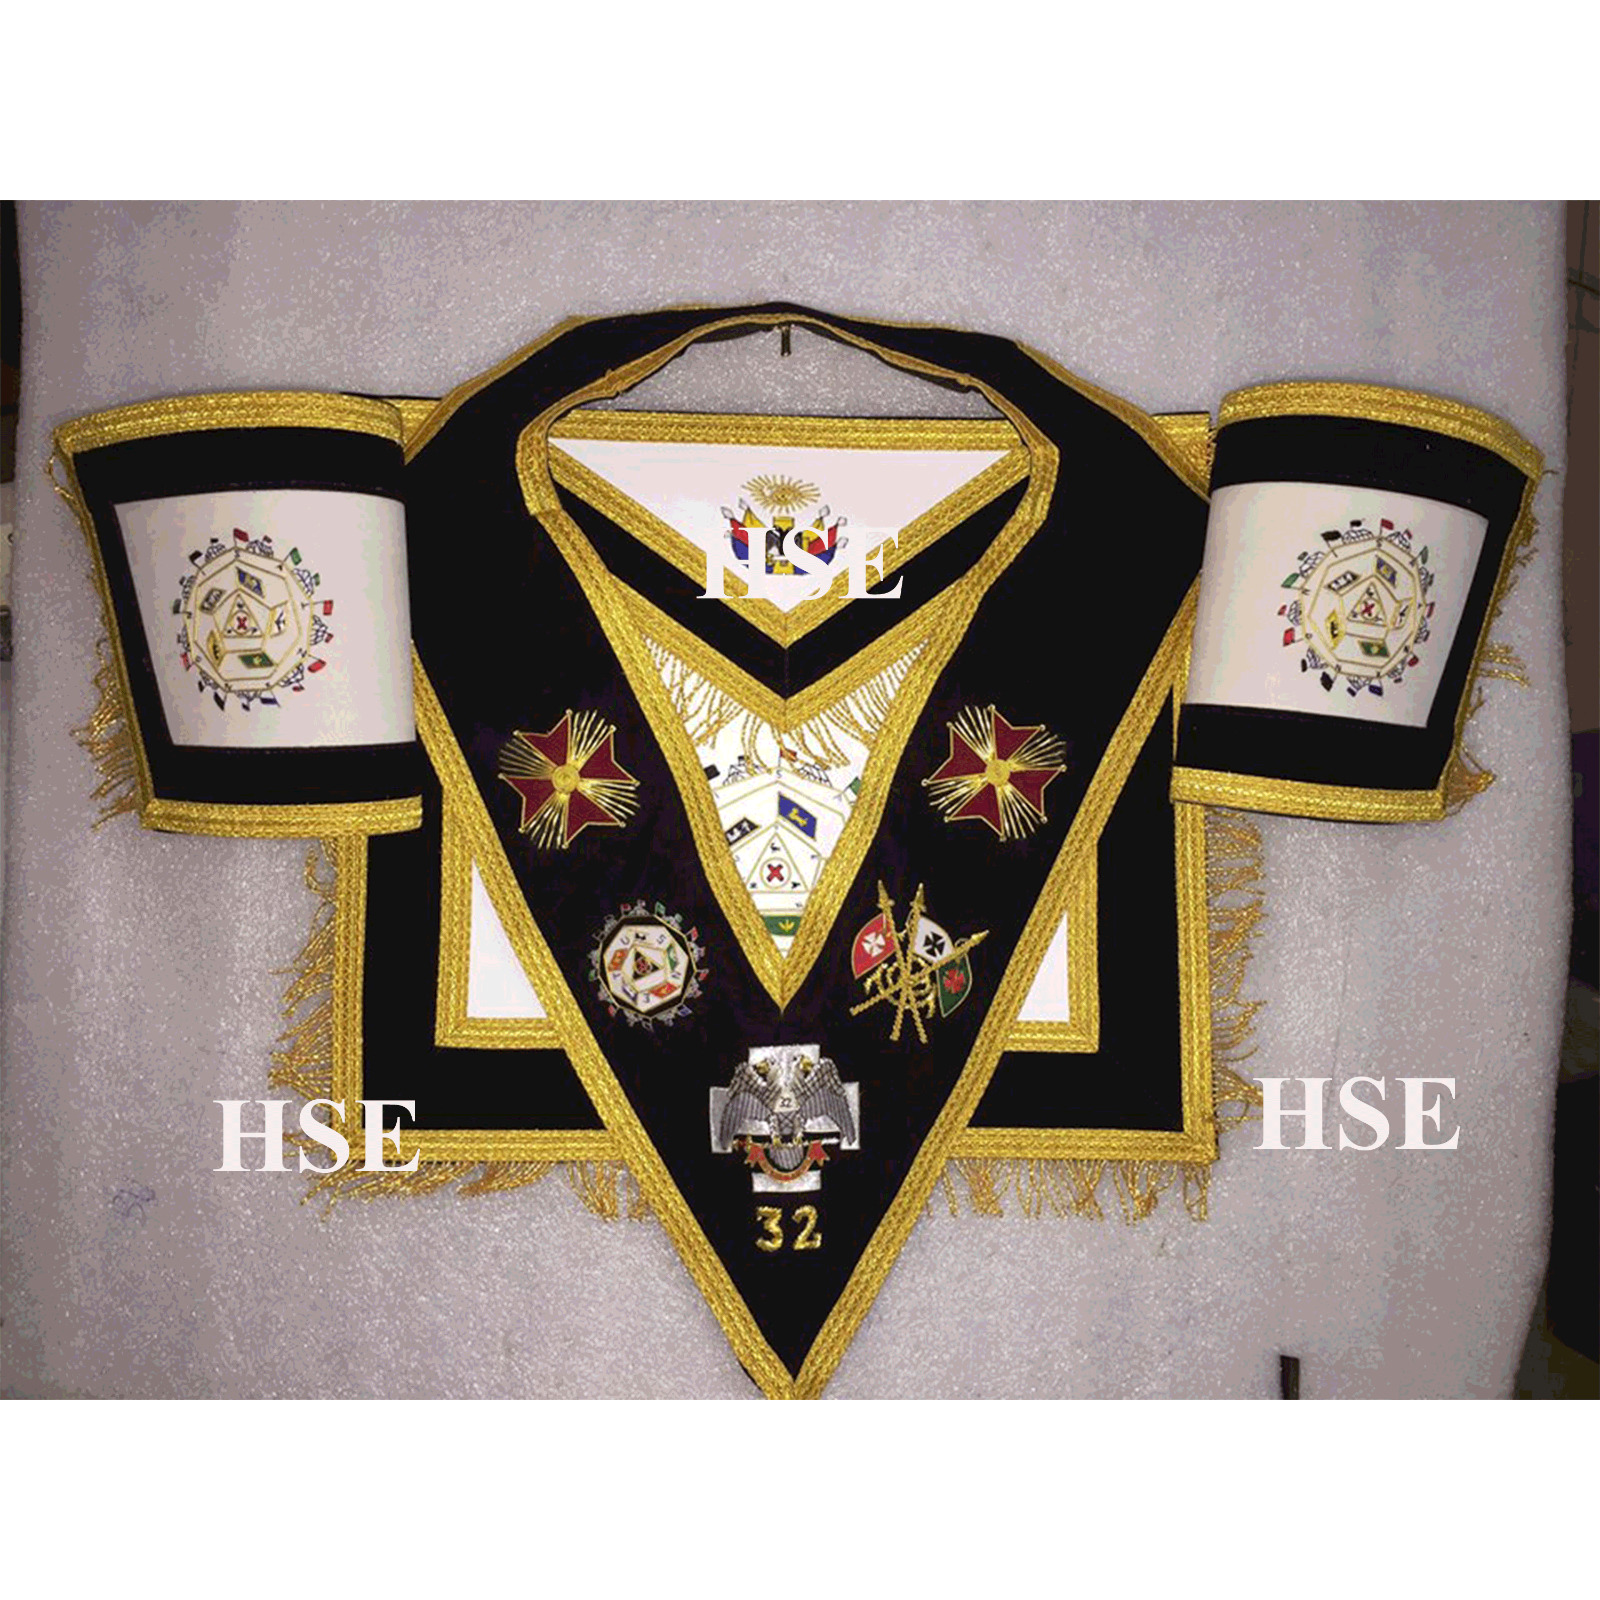 SCOTTISH RITE 32ND DEGREE APRON WITH EMBROIDERY COLLAR & CUFF'S BLACK-HSE